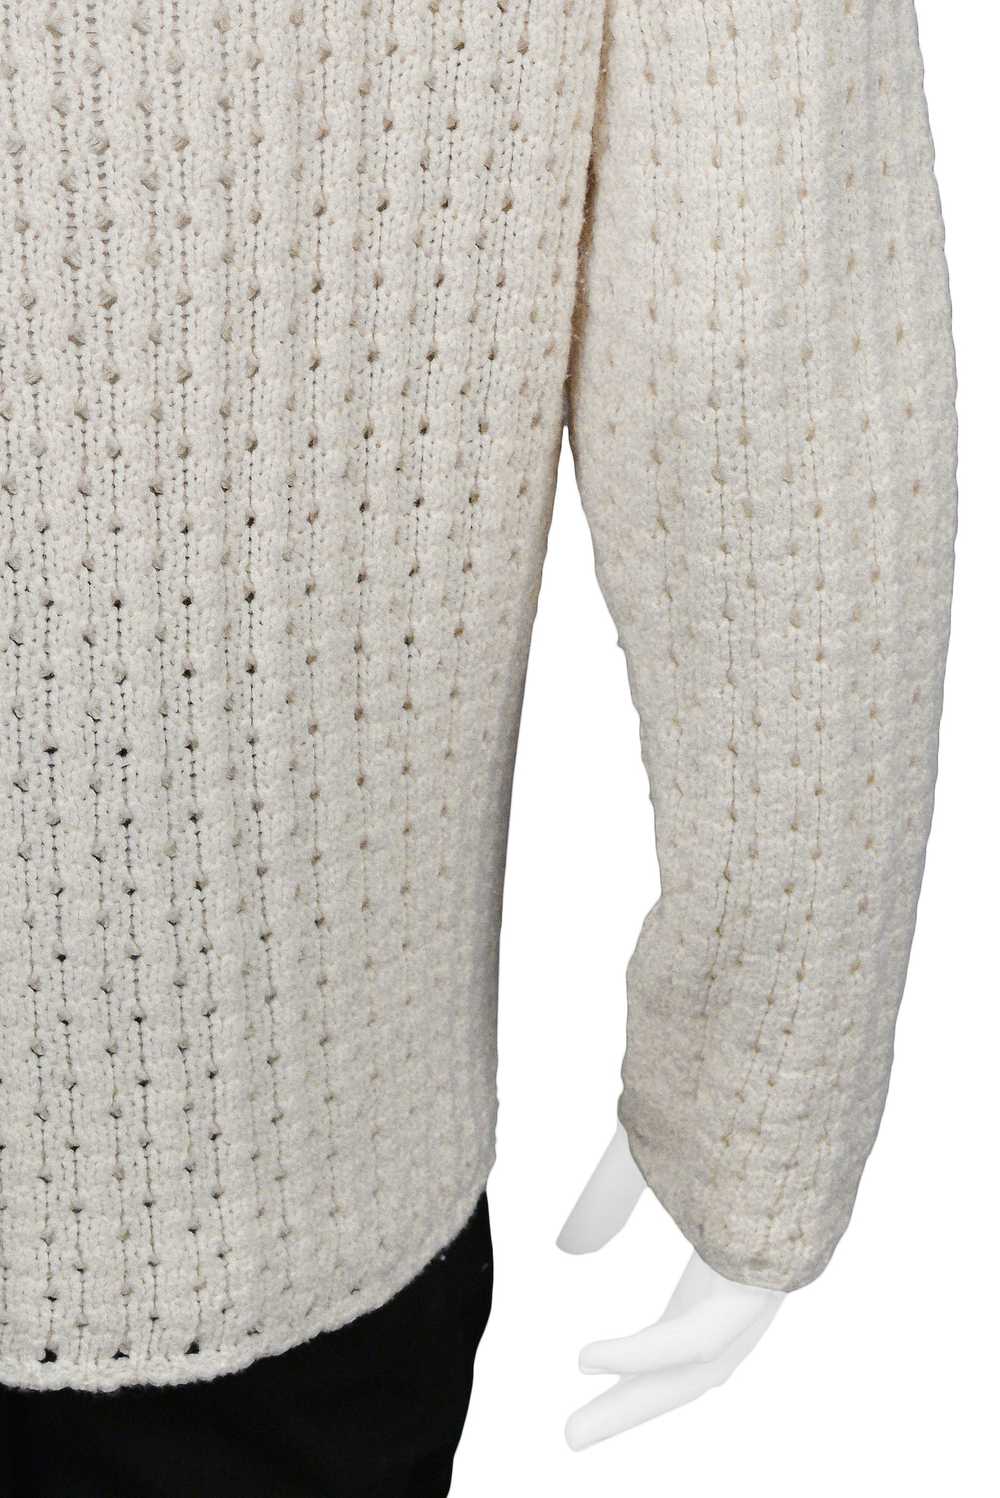 HELMUT LANG OFF WHITE KNIT SWEATER - image 5